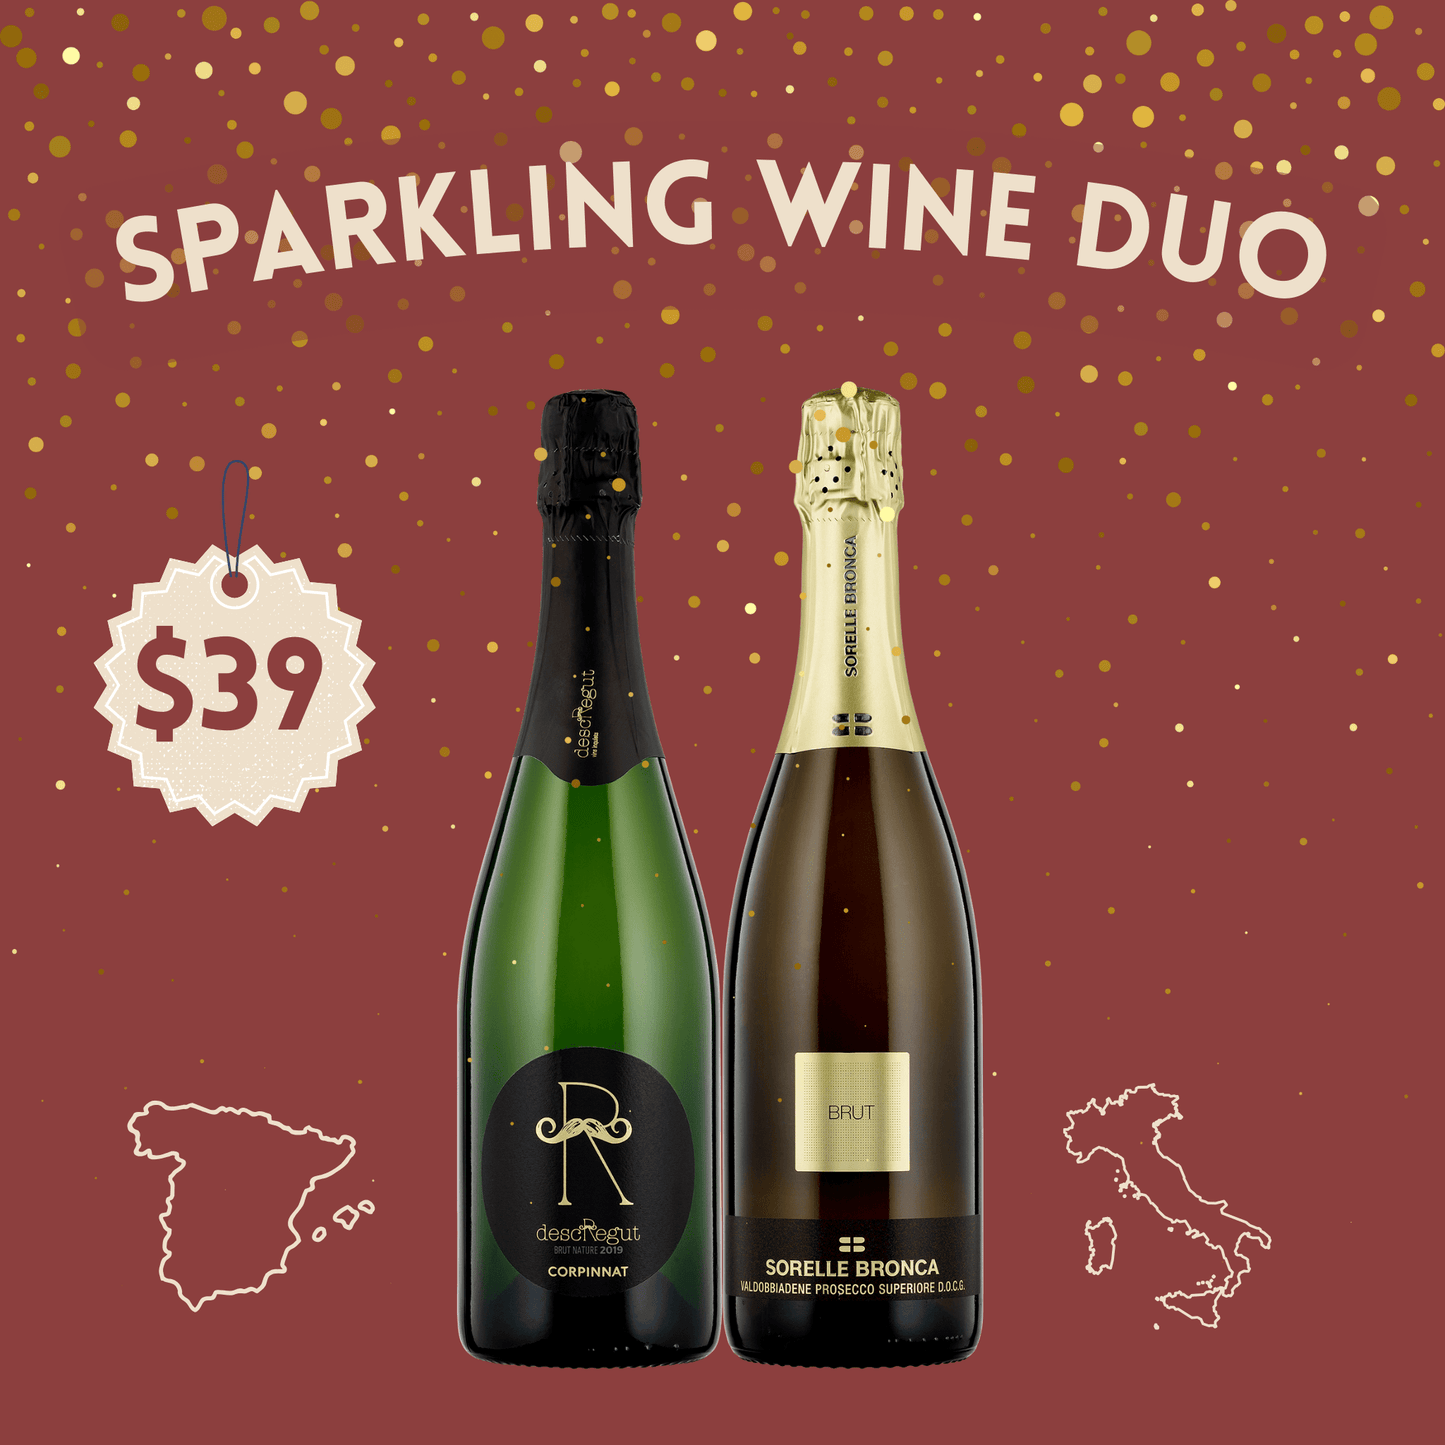 2 bottles of Sparkling Wine. One bottle is from Spain, and the other is from Italy.